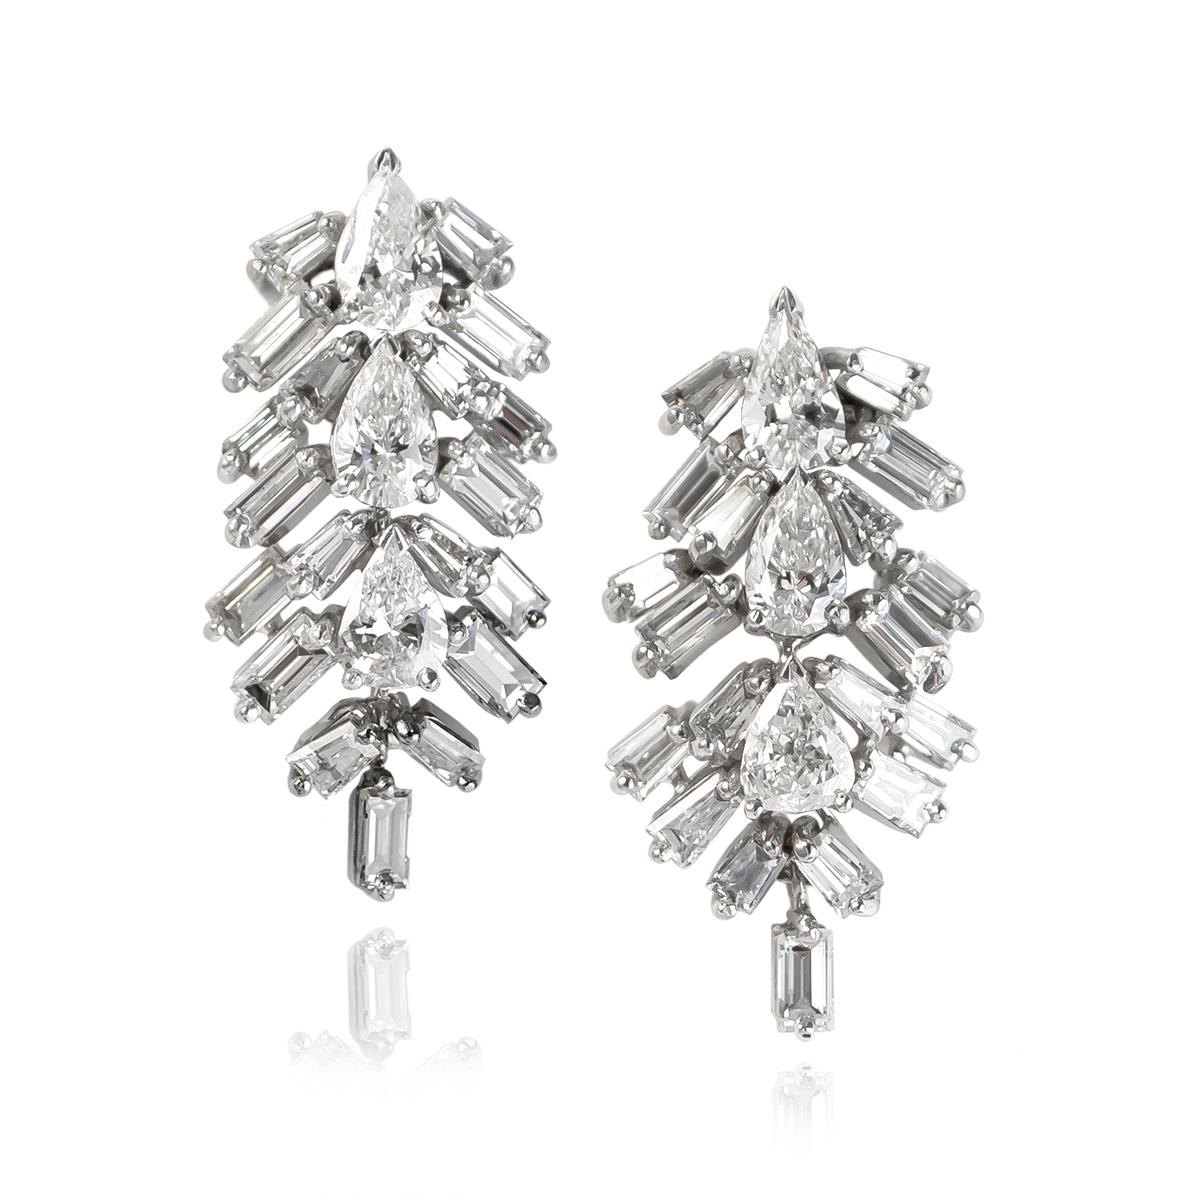 These scintillating, platinum drop earrings will be the new star of your jewelry collection! Featuring six pear shape diamonds = approximately 2.25 ctw and assorted straight / tapered baguettes, these earrings are a huge look for the price point!